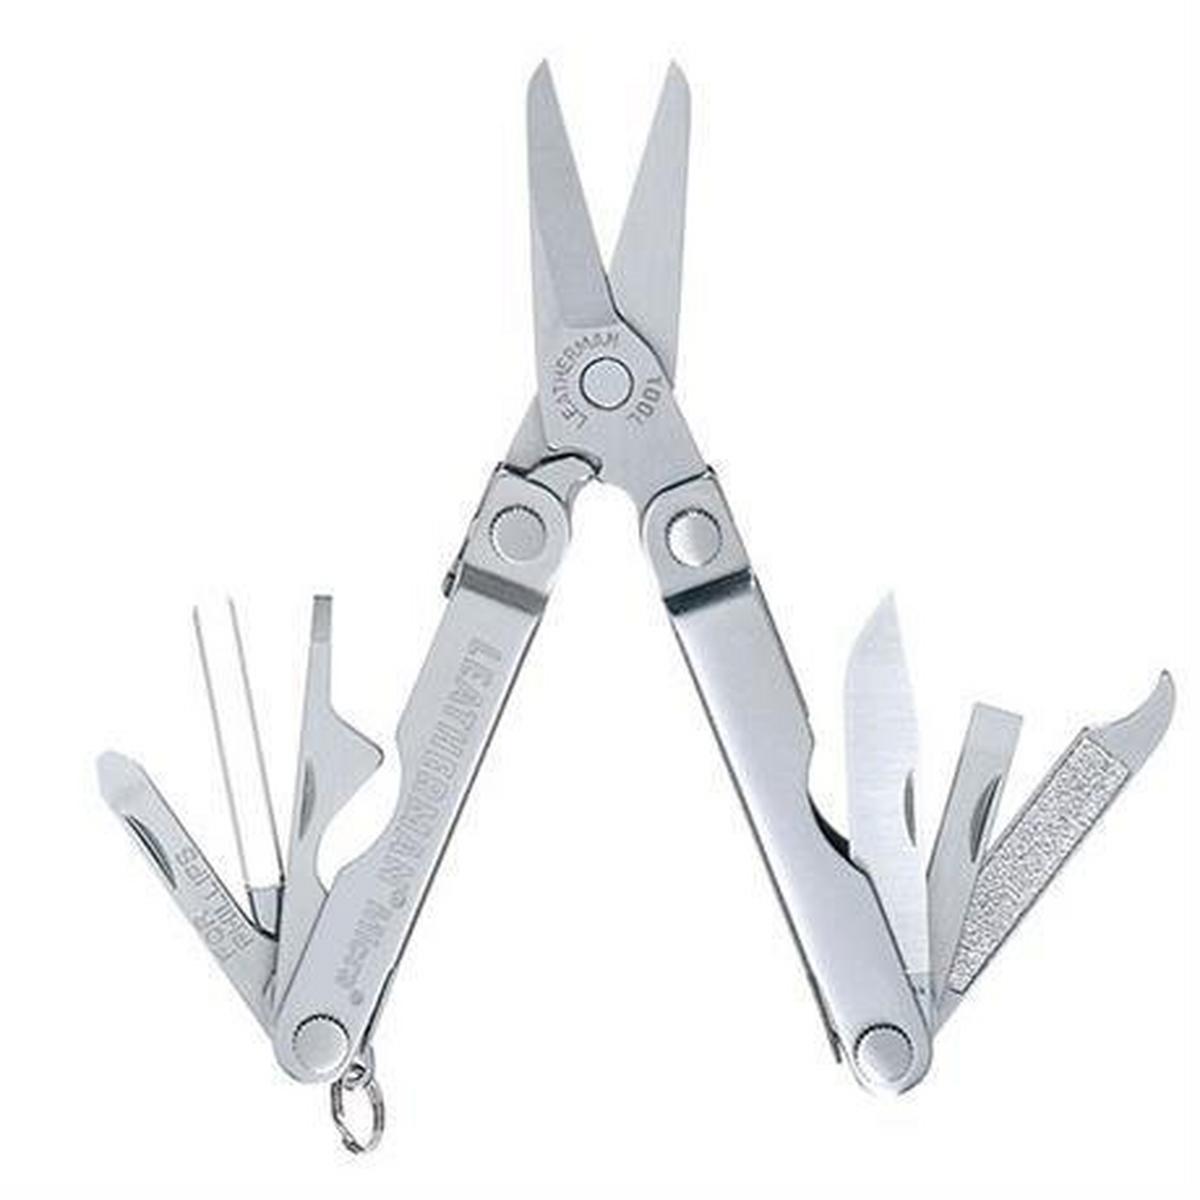 Leatherman Multi-tool Micra Stainless CLAM PACK